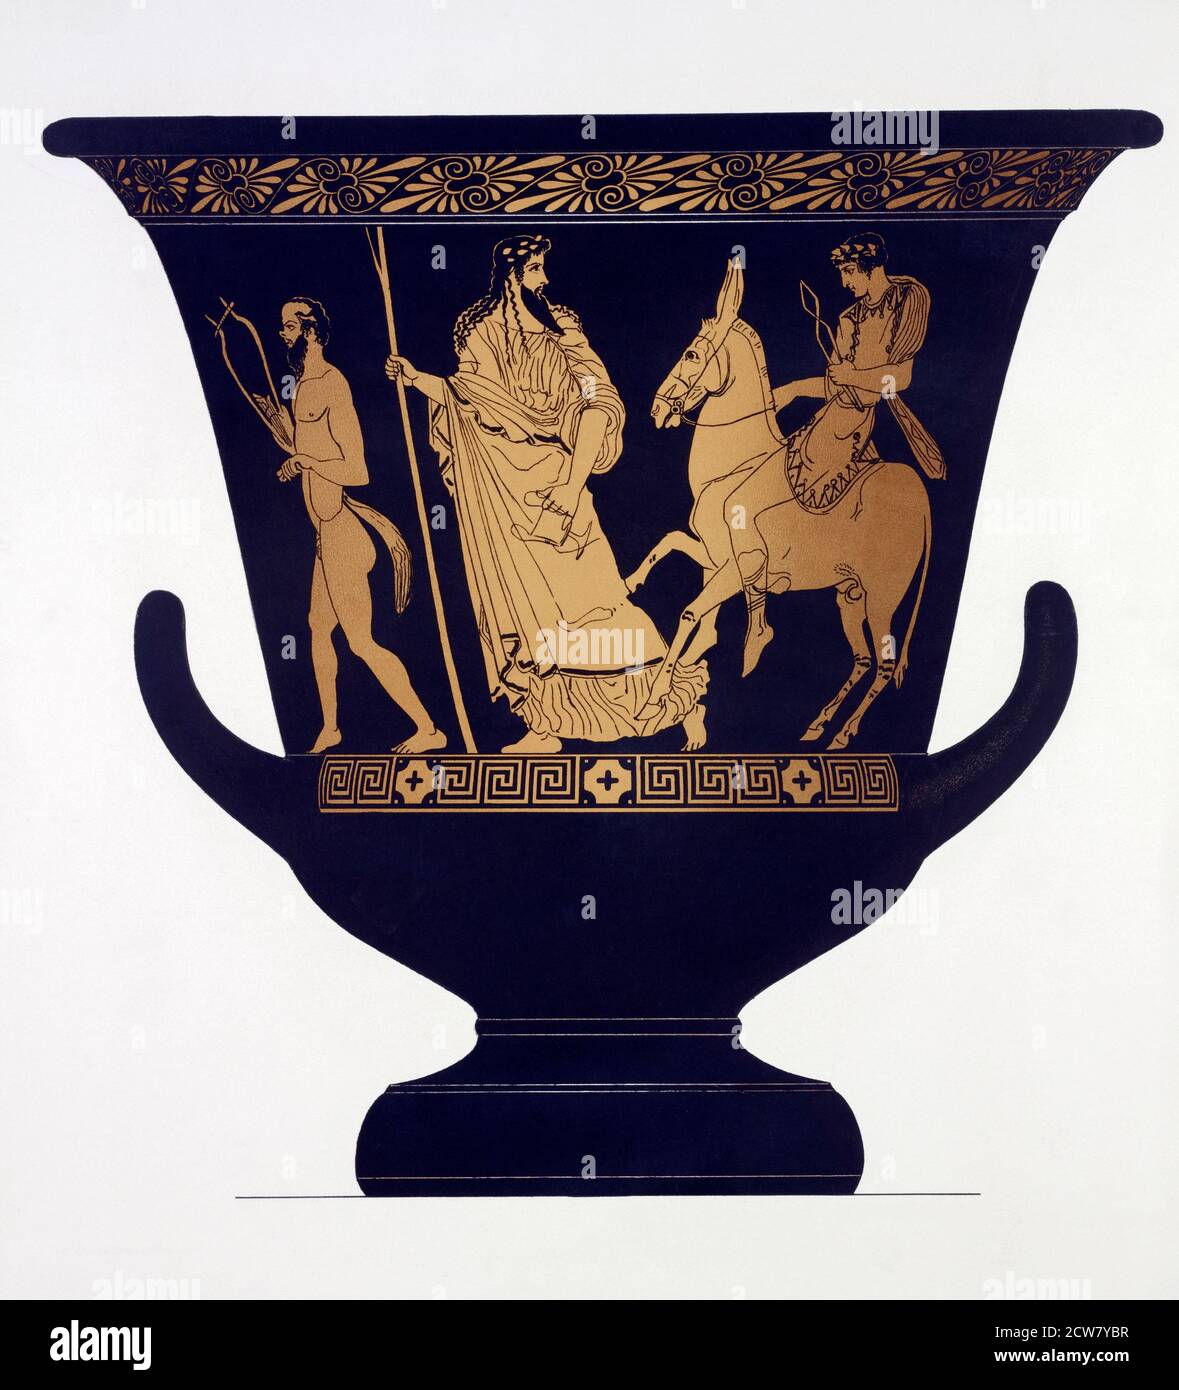 Greek vase.  Dionysus, the God of Wine and Hephaistus, the God of Fire led by a man with a lyre. After a work by 19th century German Greek vases scholar, Albert Genick. Stock Photo